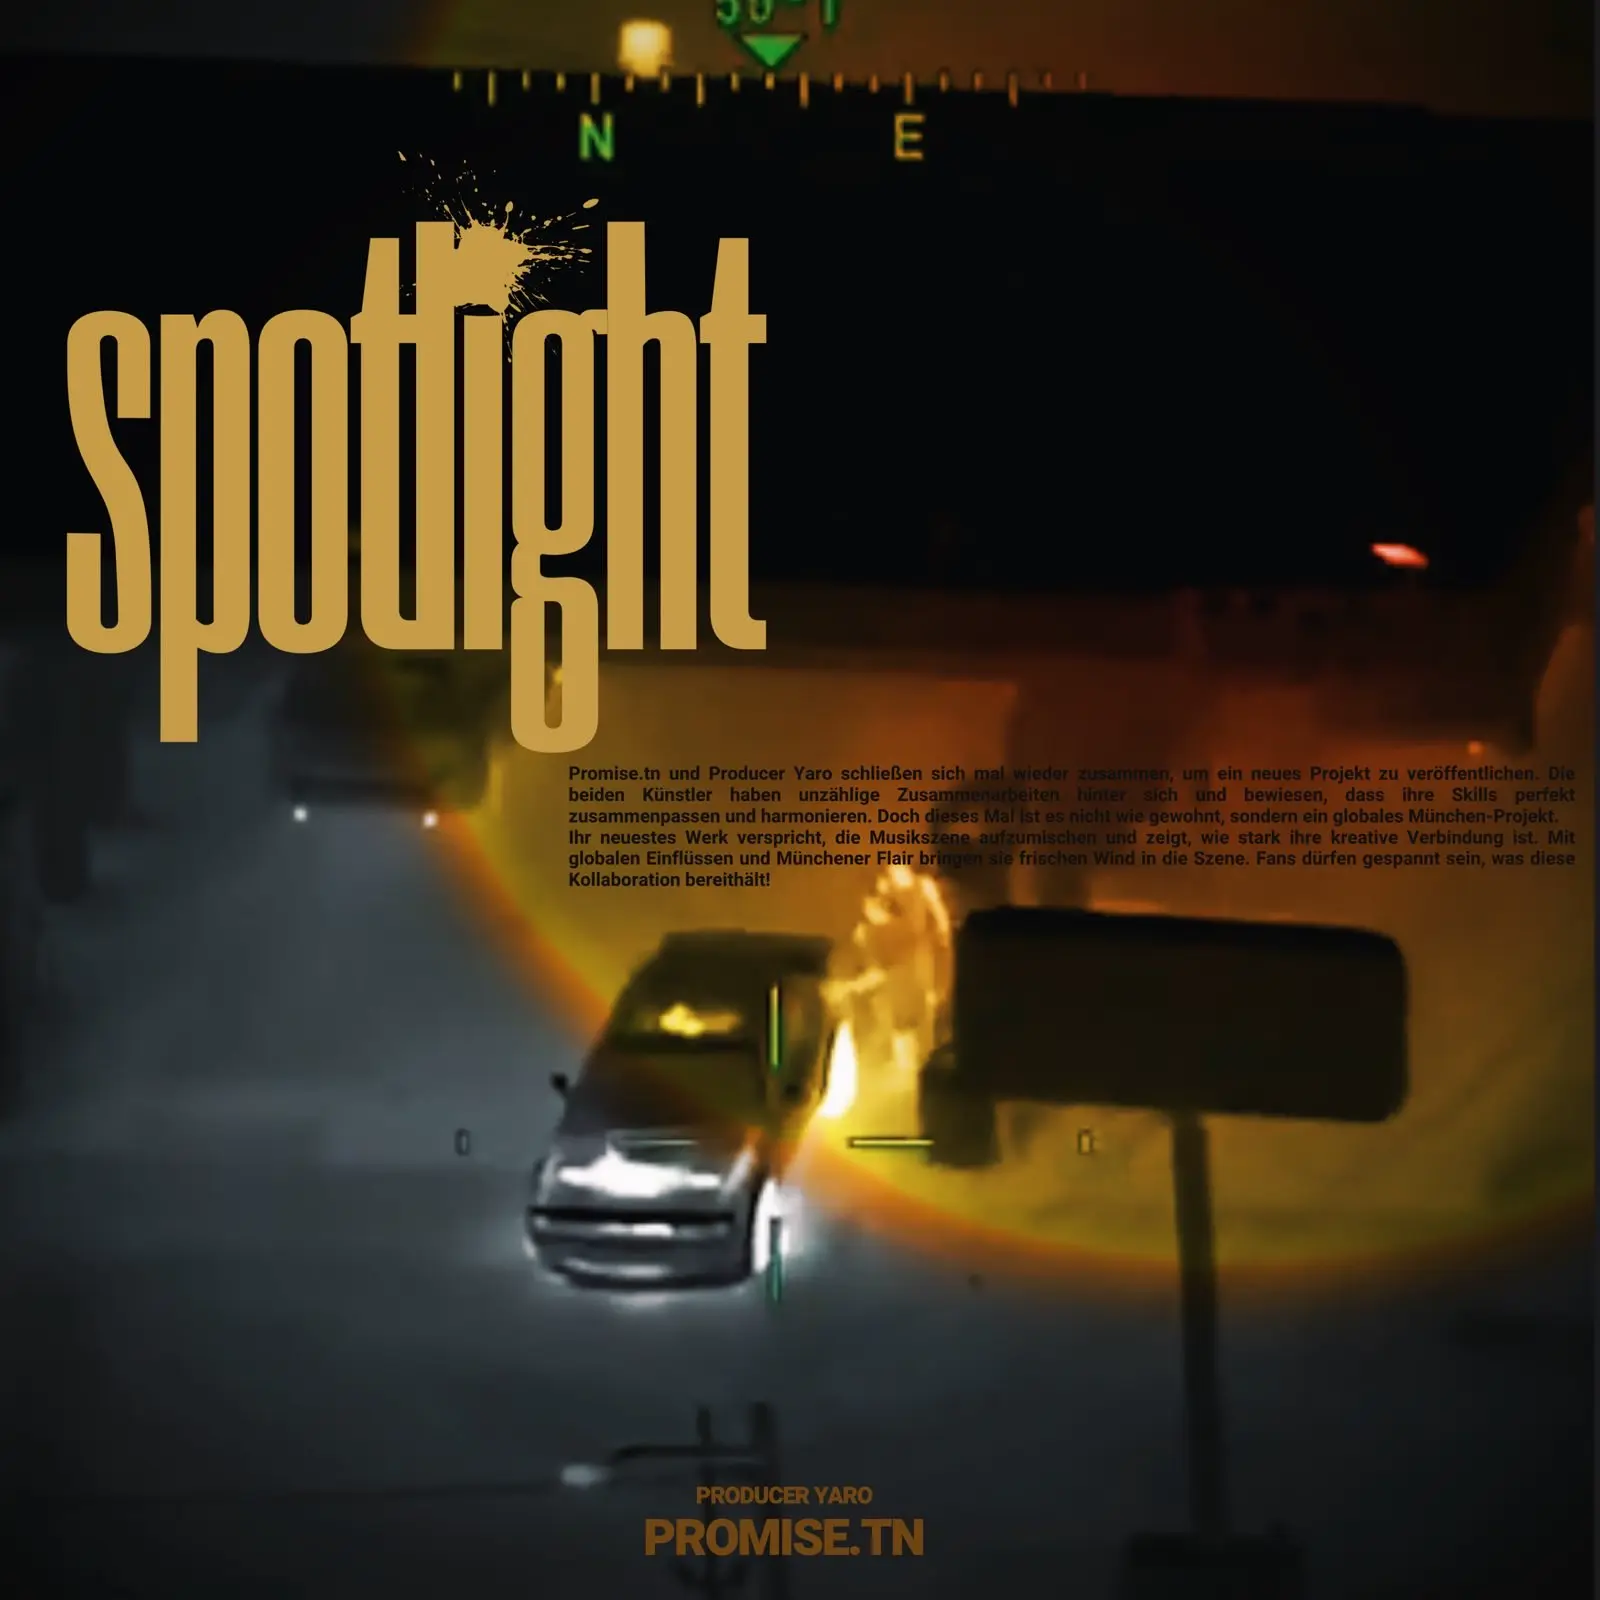 The image is a poster about the collaboration between musician Promise.Tn and Producer Yaro. The poster is designed in a dark and mysterious style with a blurry car in the foreground and a compass with a spotlight effect in the background. The text is in German and talks about the release of a new song.